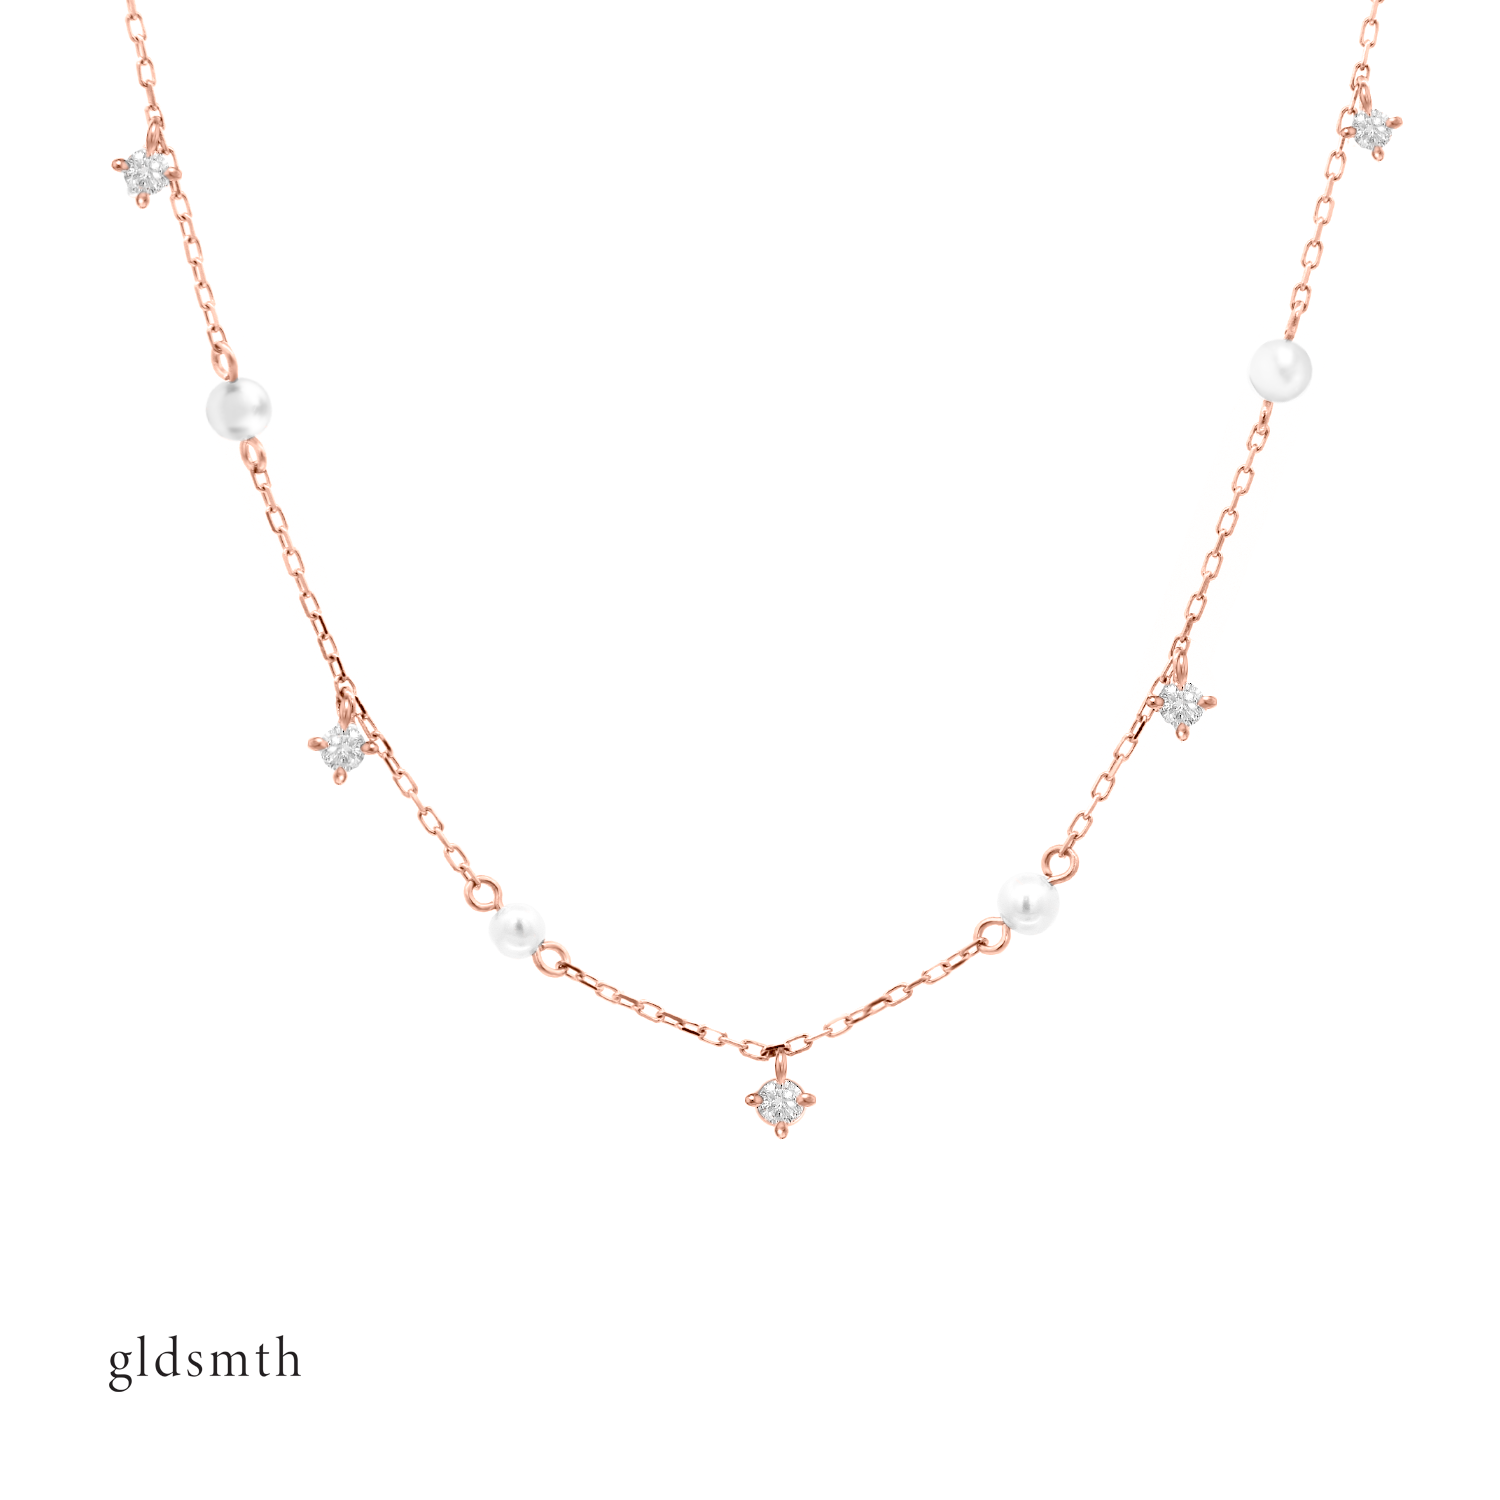 Timeless and elegant hand crafted 10k solid rose gold necklace with freshwater pearls and conflict-free diamonds.